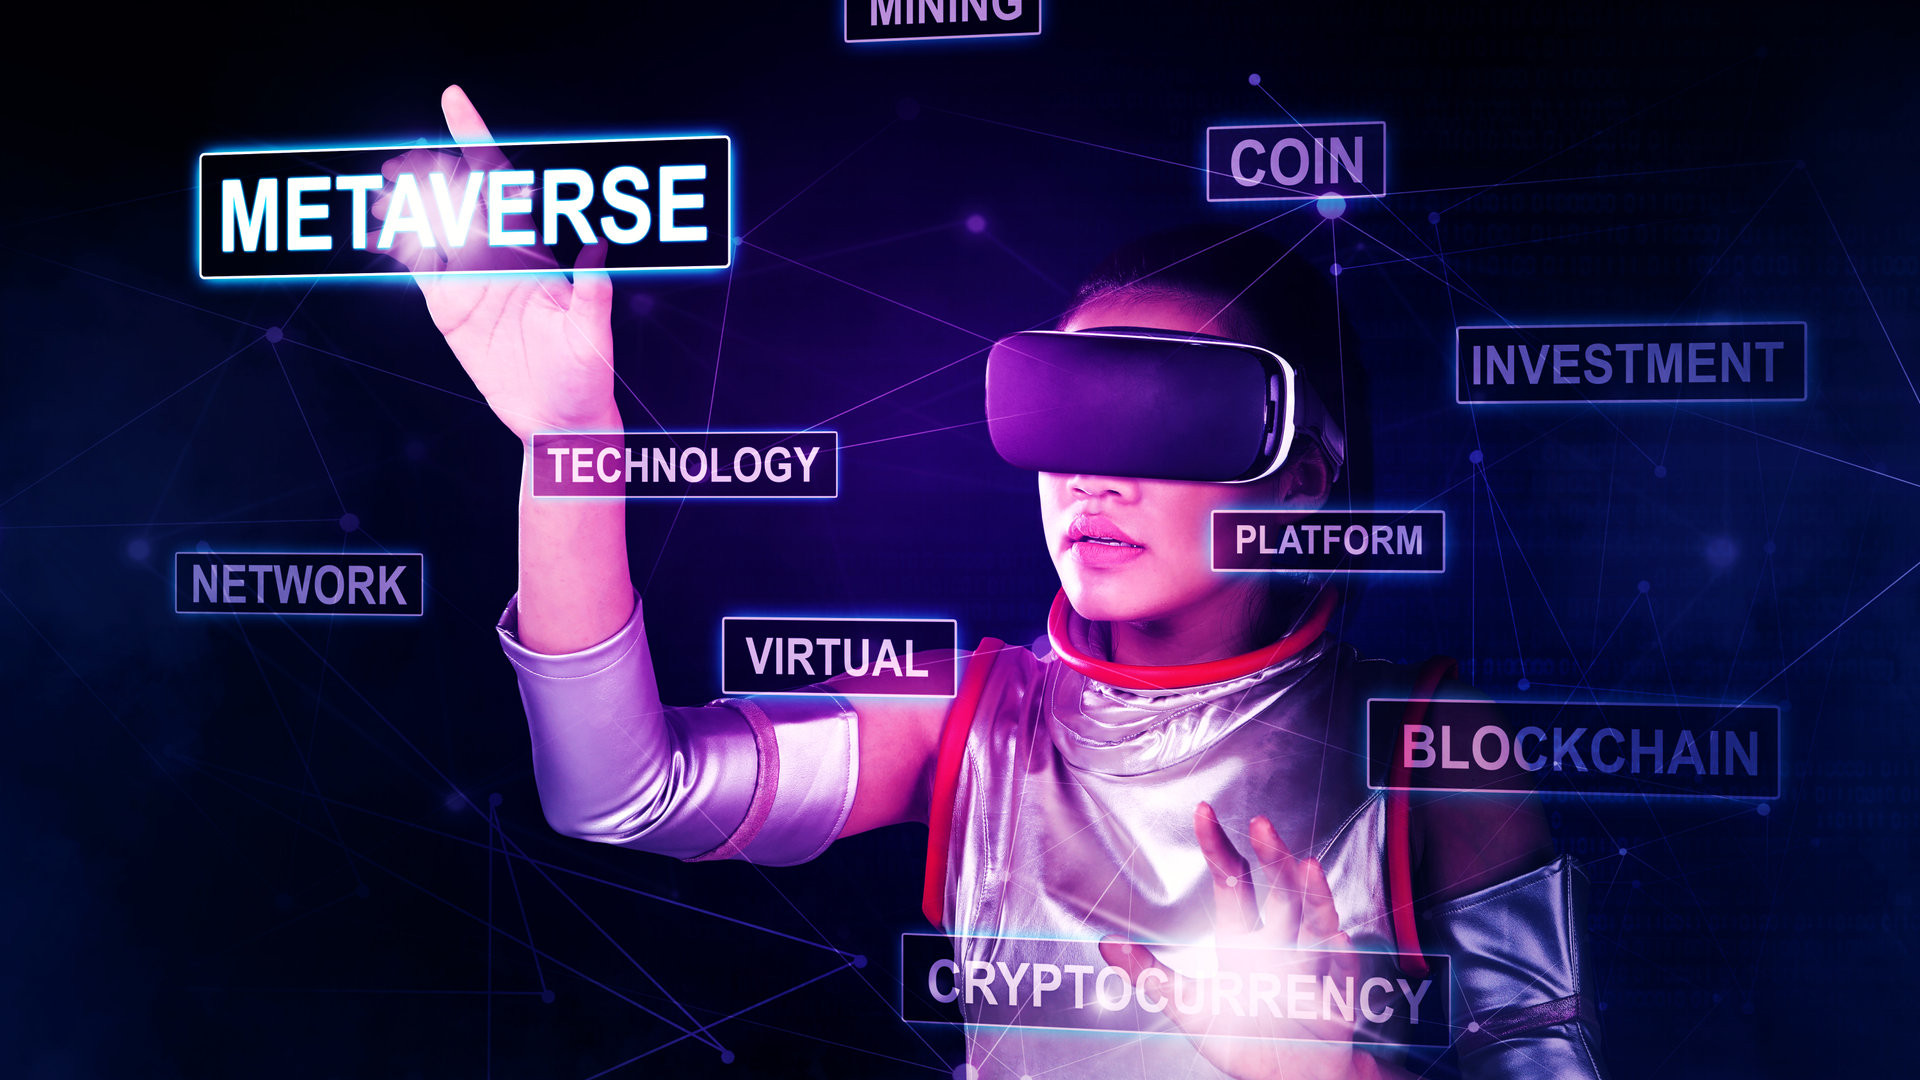 Futuristic woman touching metaverse word while trading cryptocurrency in the cyberspace